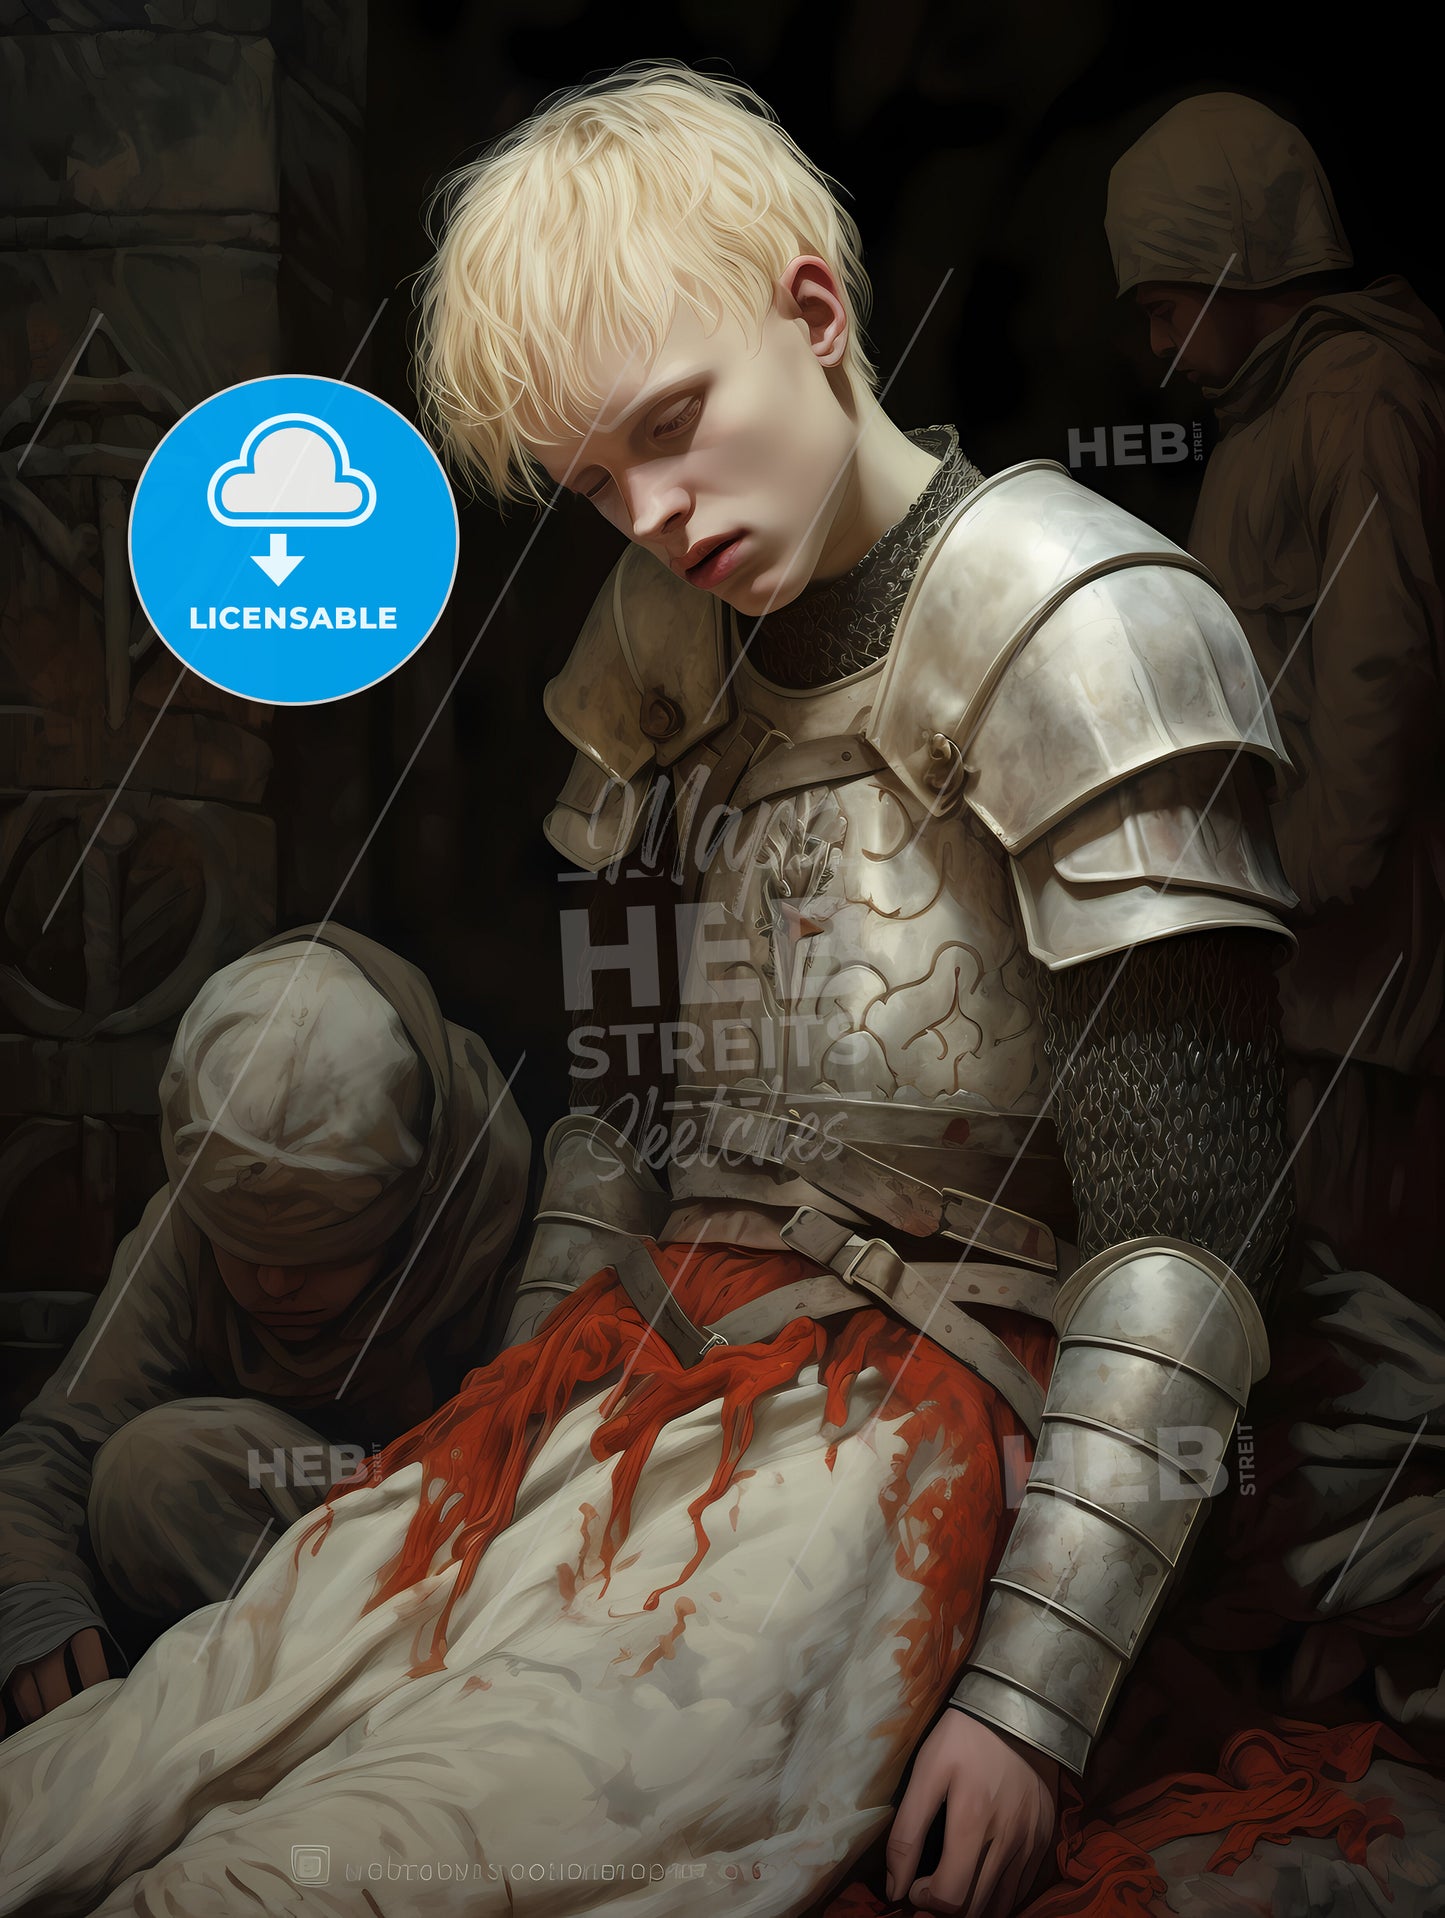 The Tragic Death Of The Albino Boy, A Man In Armor With Blood On His Stomach